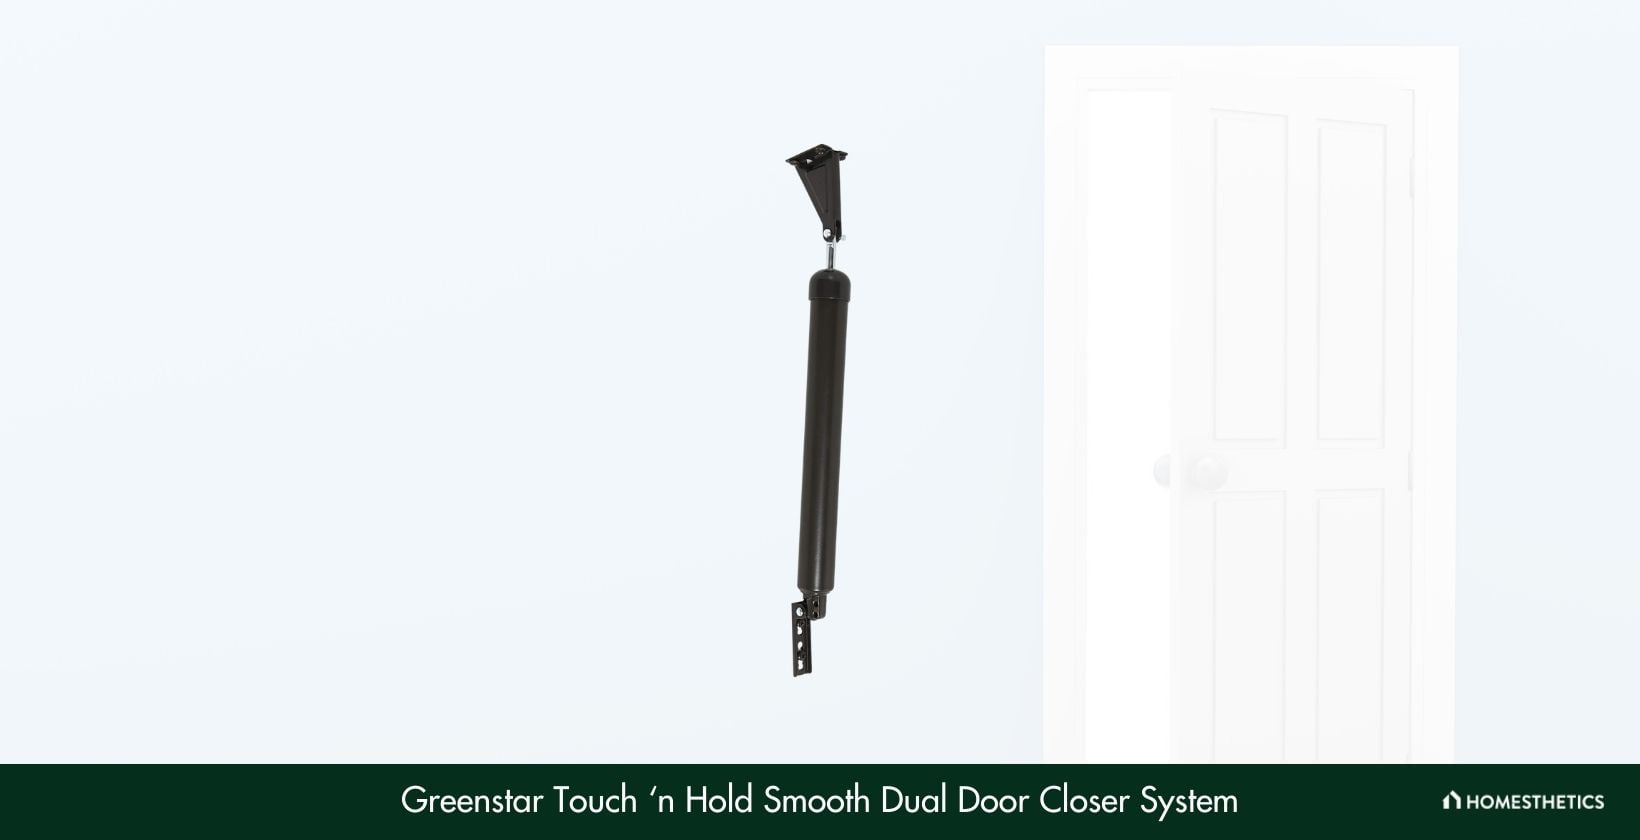 Greenstar Touch ‘n Hold Smooth Dual Door Closer System